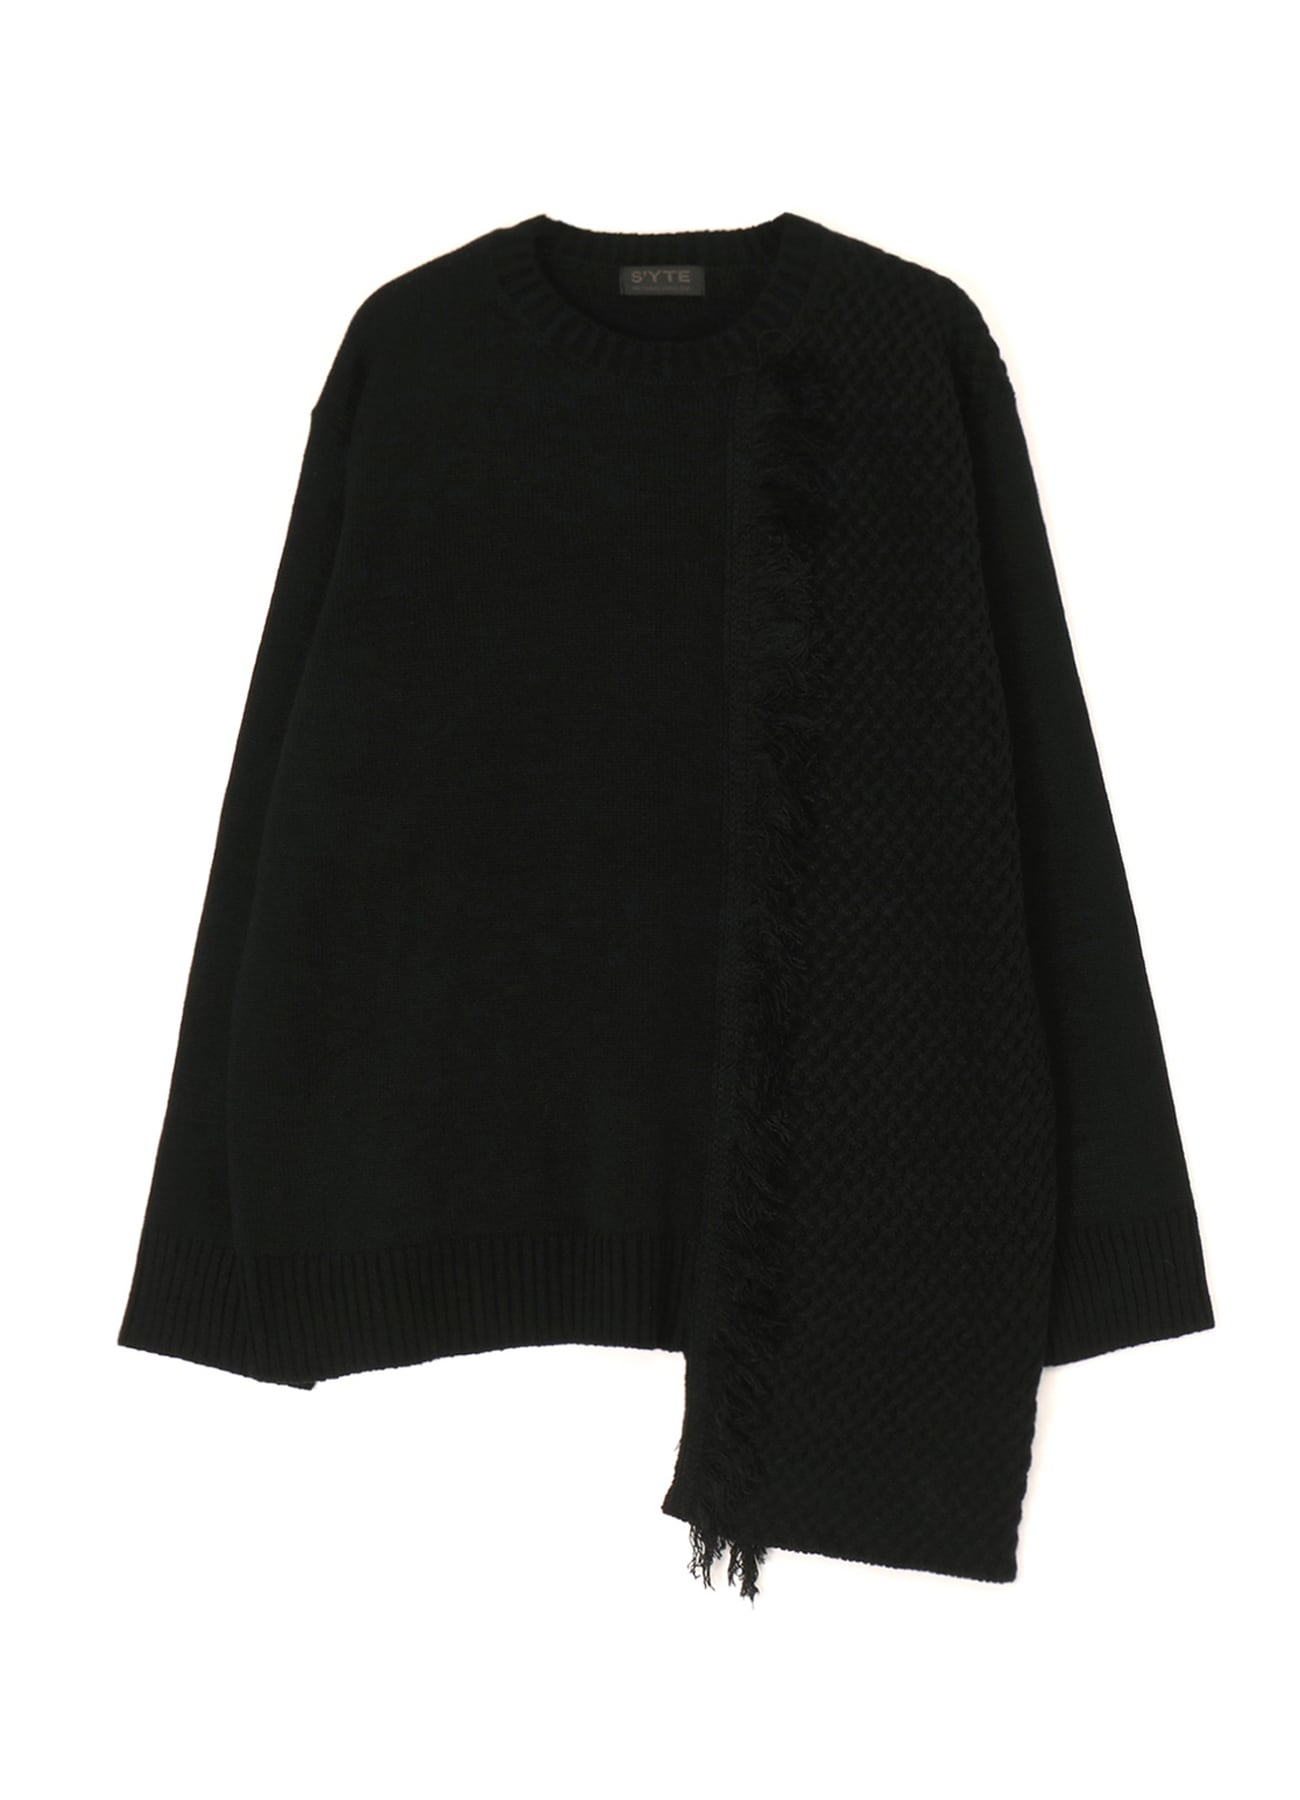 ASYMMETRICAL DESIGN KNIT WITH FRINGE DETAIL SWITCHED TO JACQUARD KNITTING